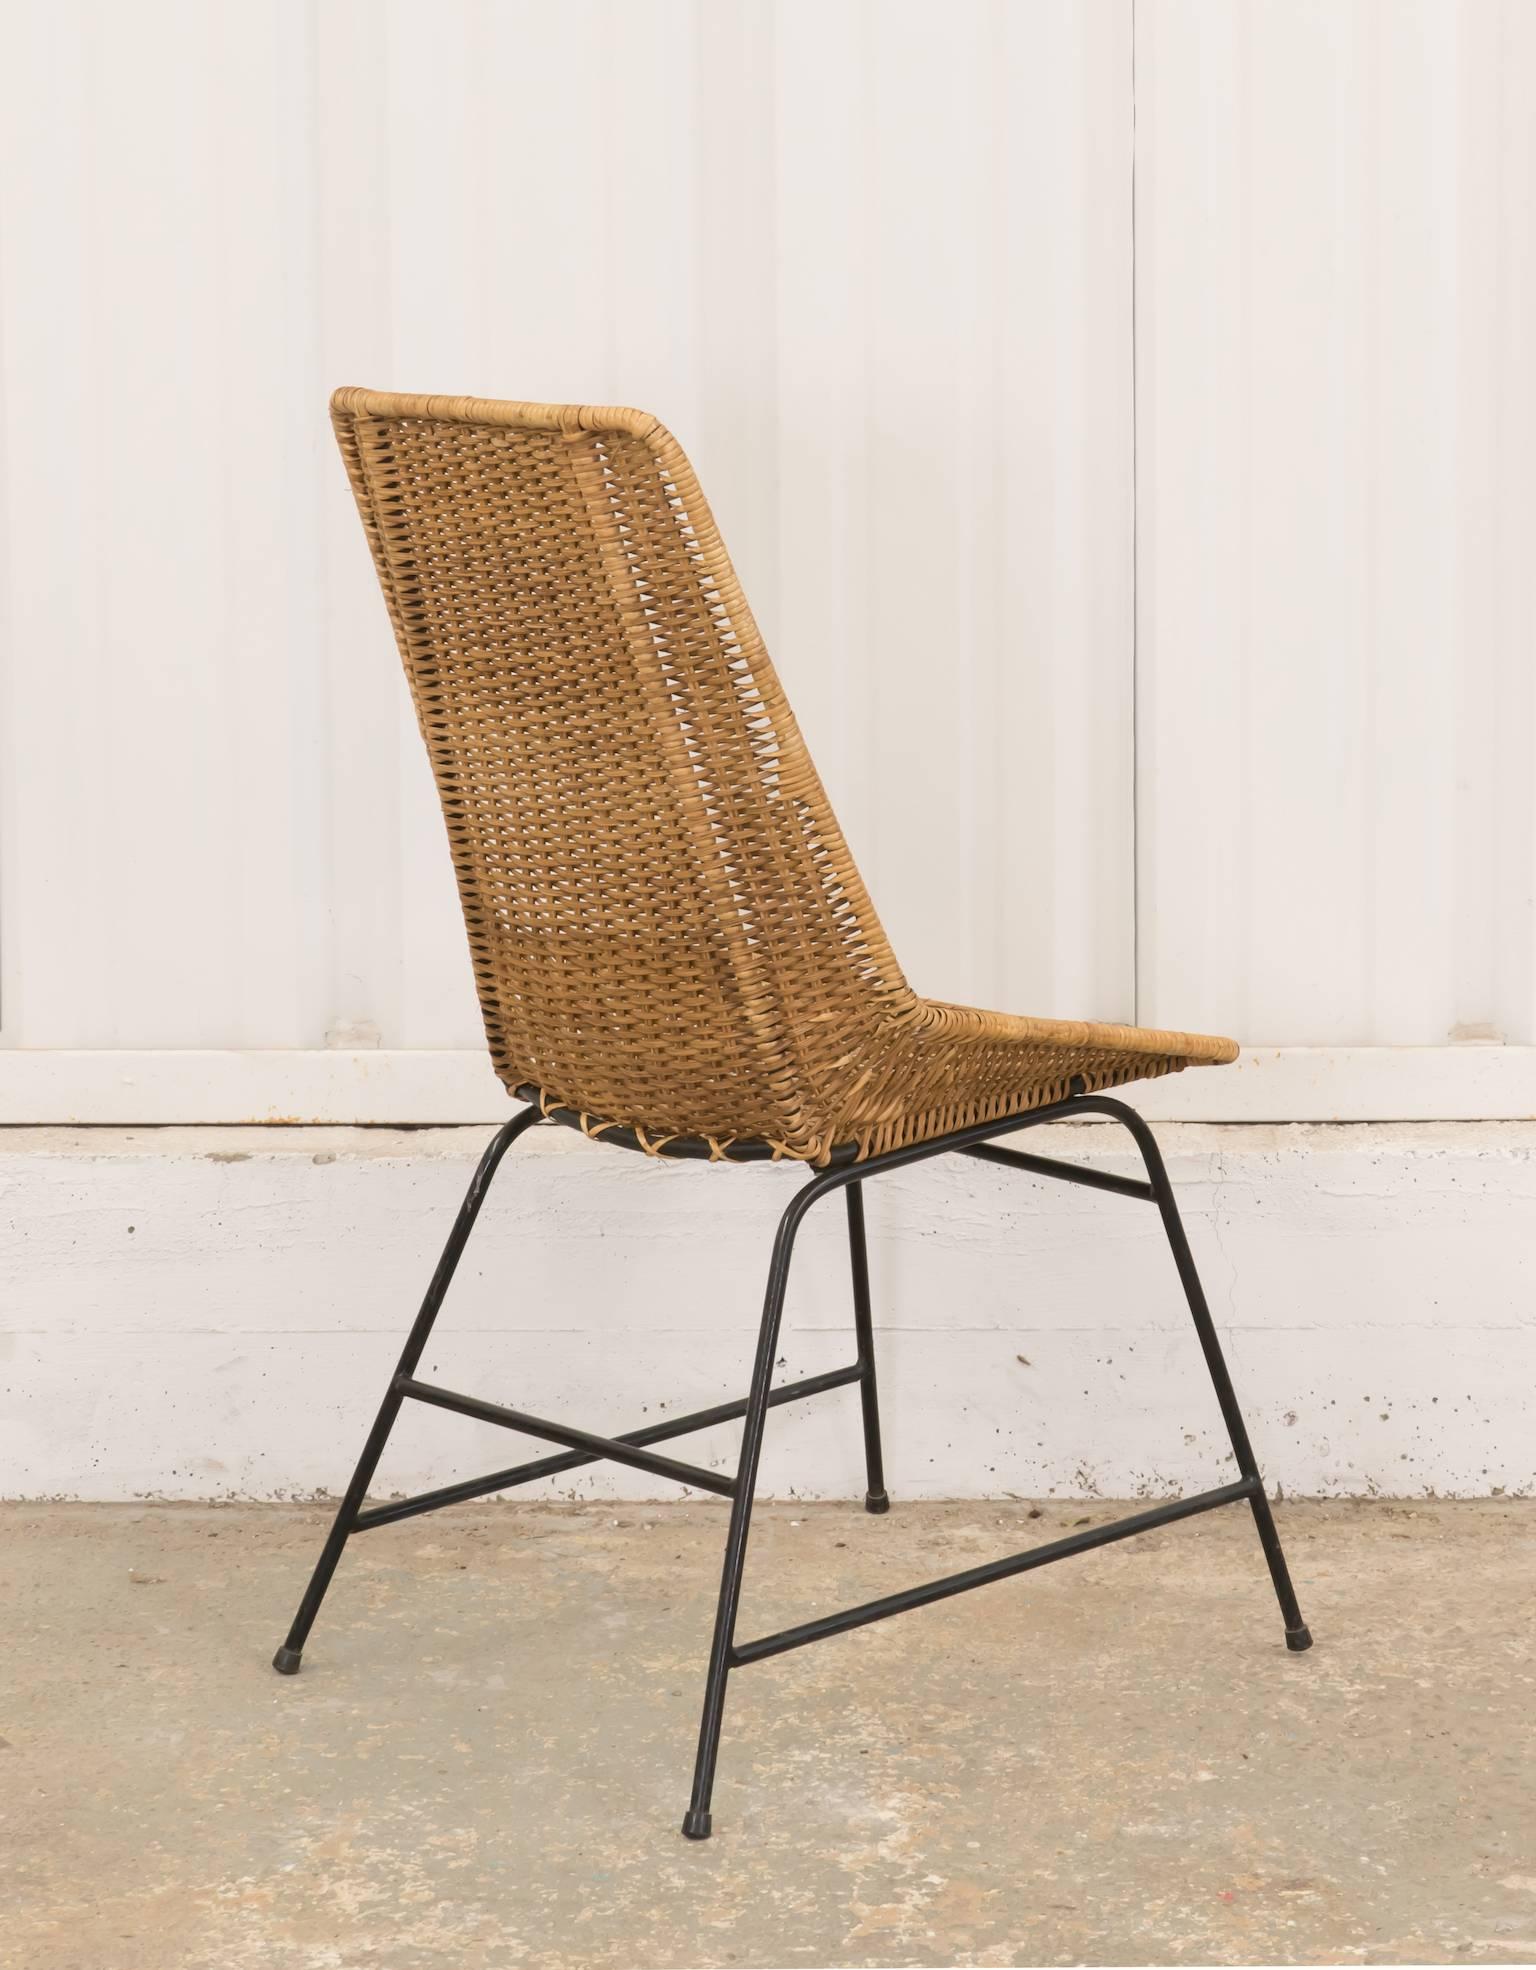 wicker and metal chairs